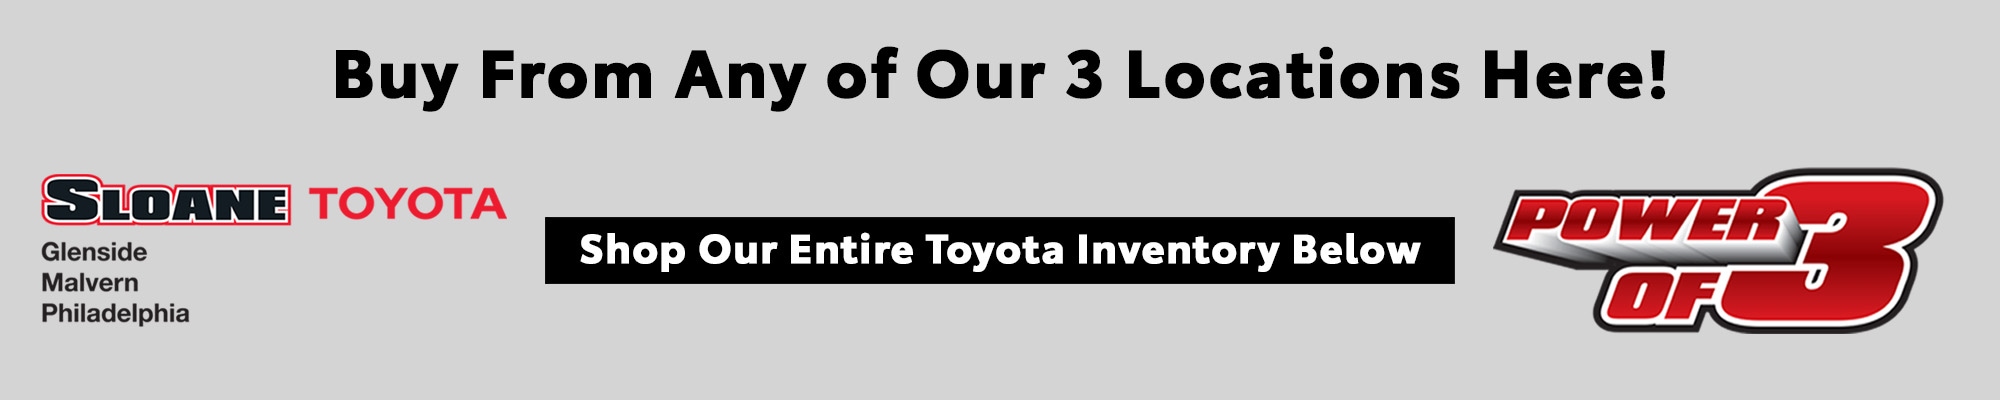 Shop and buy from Sloane Toyota's three Pennsylvania dealership locations in Philadelphia, Glenside, and Malvern here.